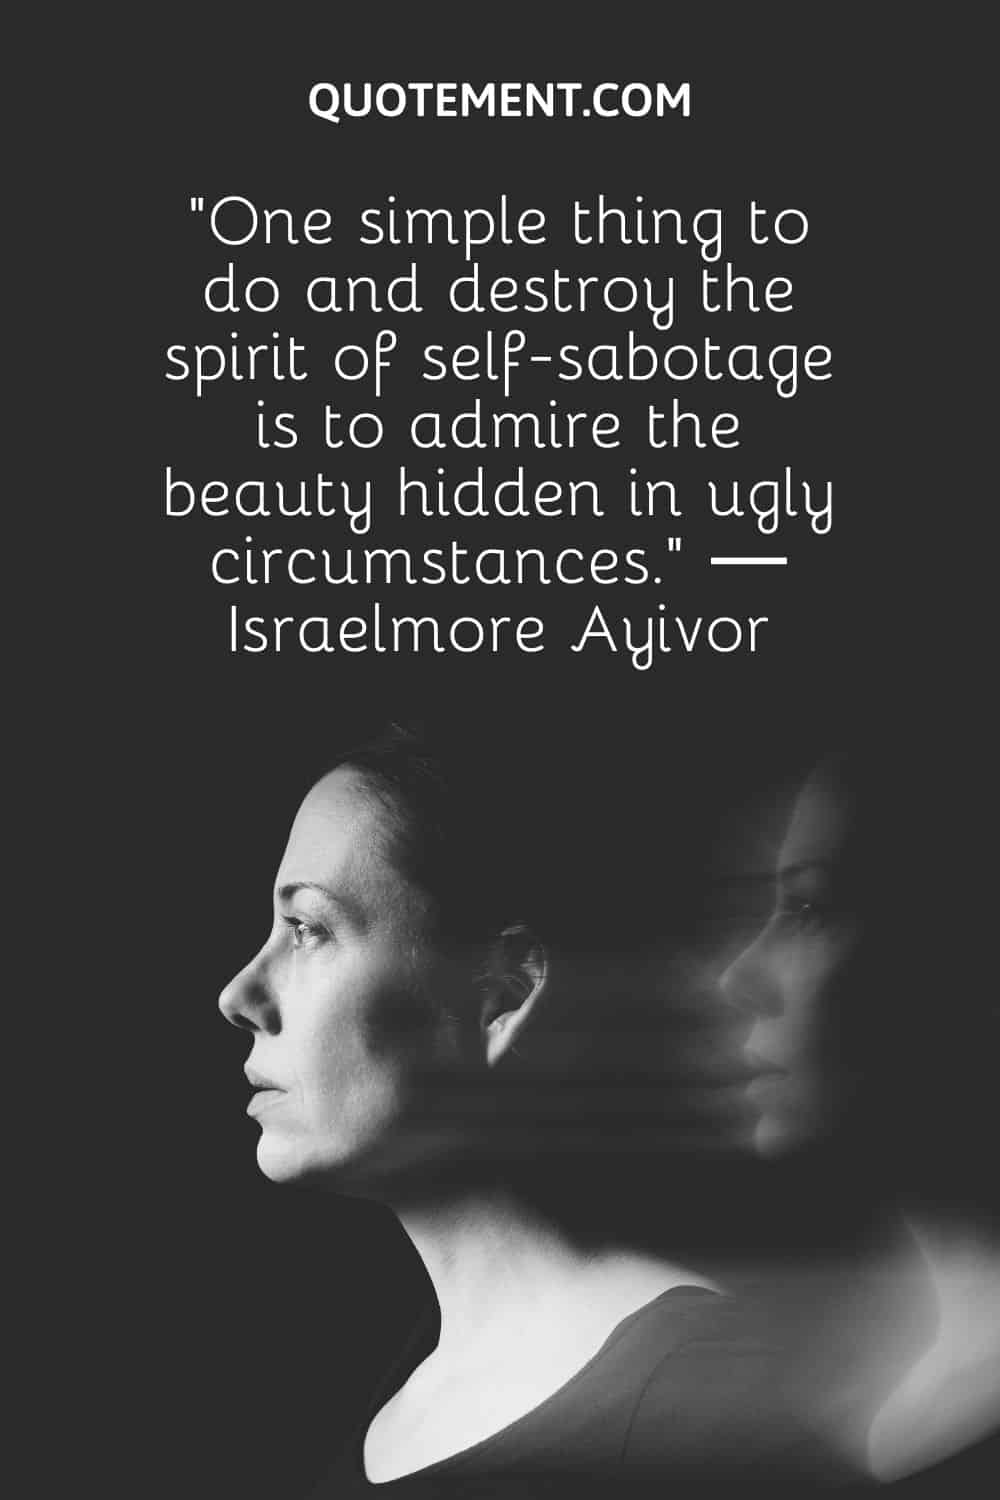 “One simple thing to do and destroy the spirit of self-sabotage is to admire the beauty hidden in ugly circumstances.” ― Israelmore Ayivor